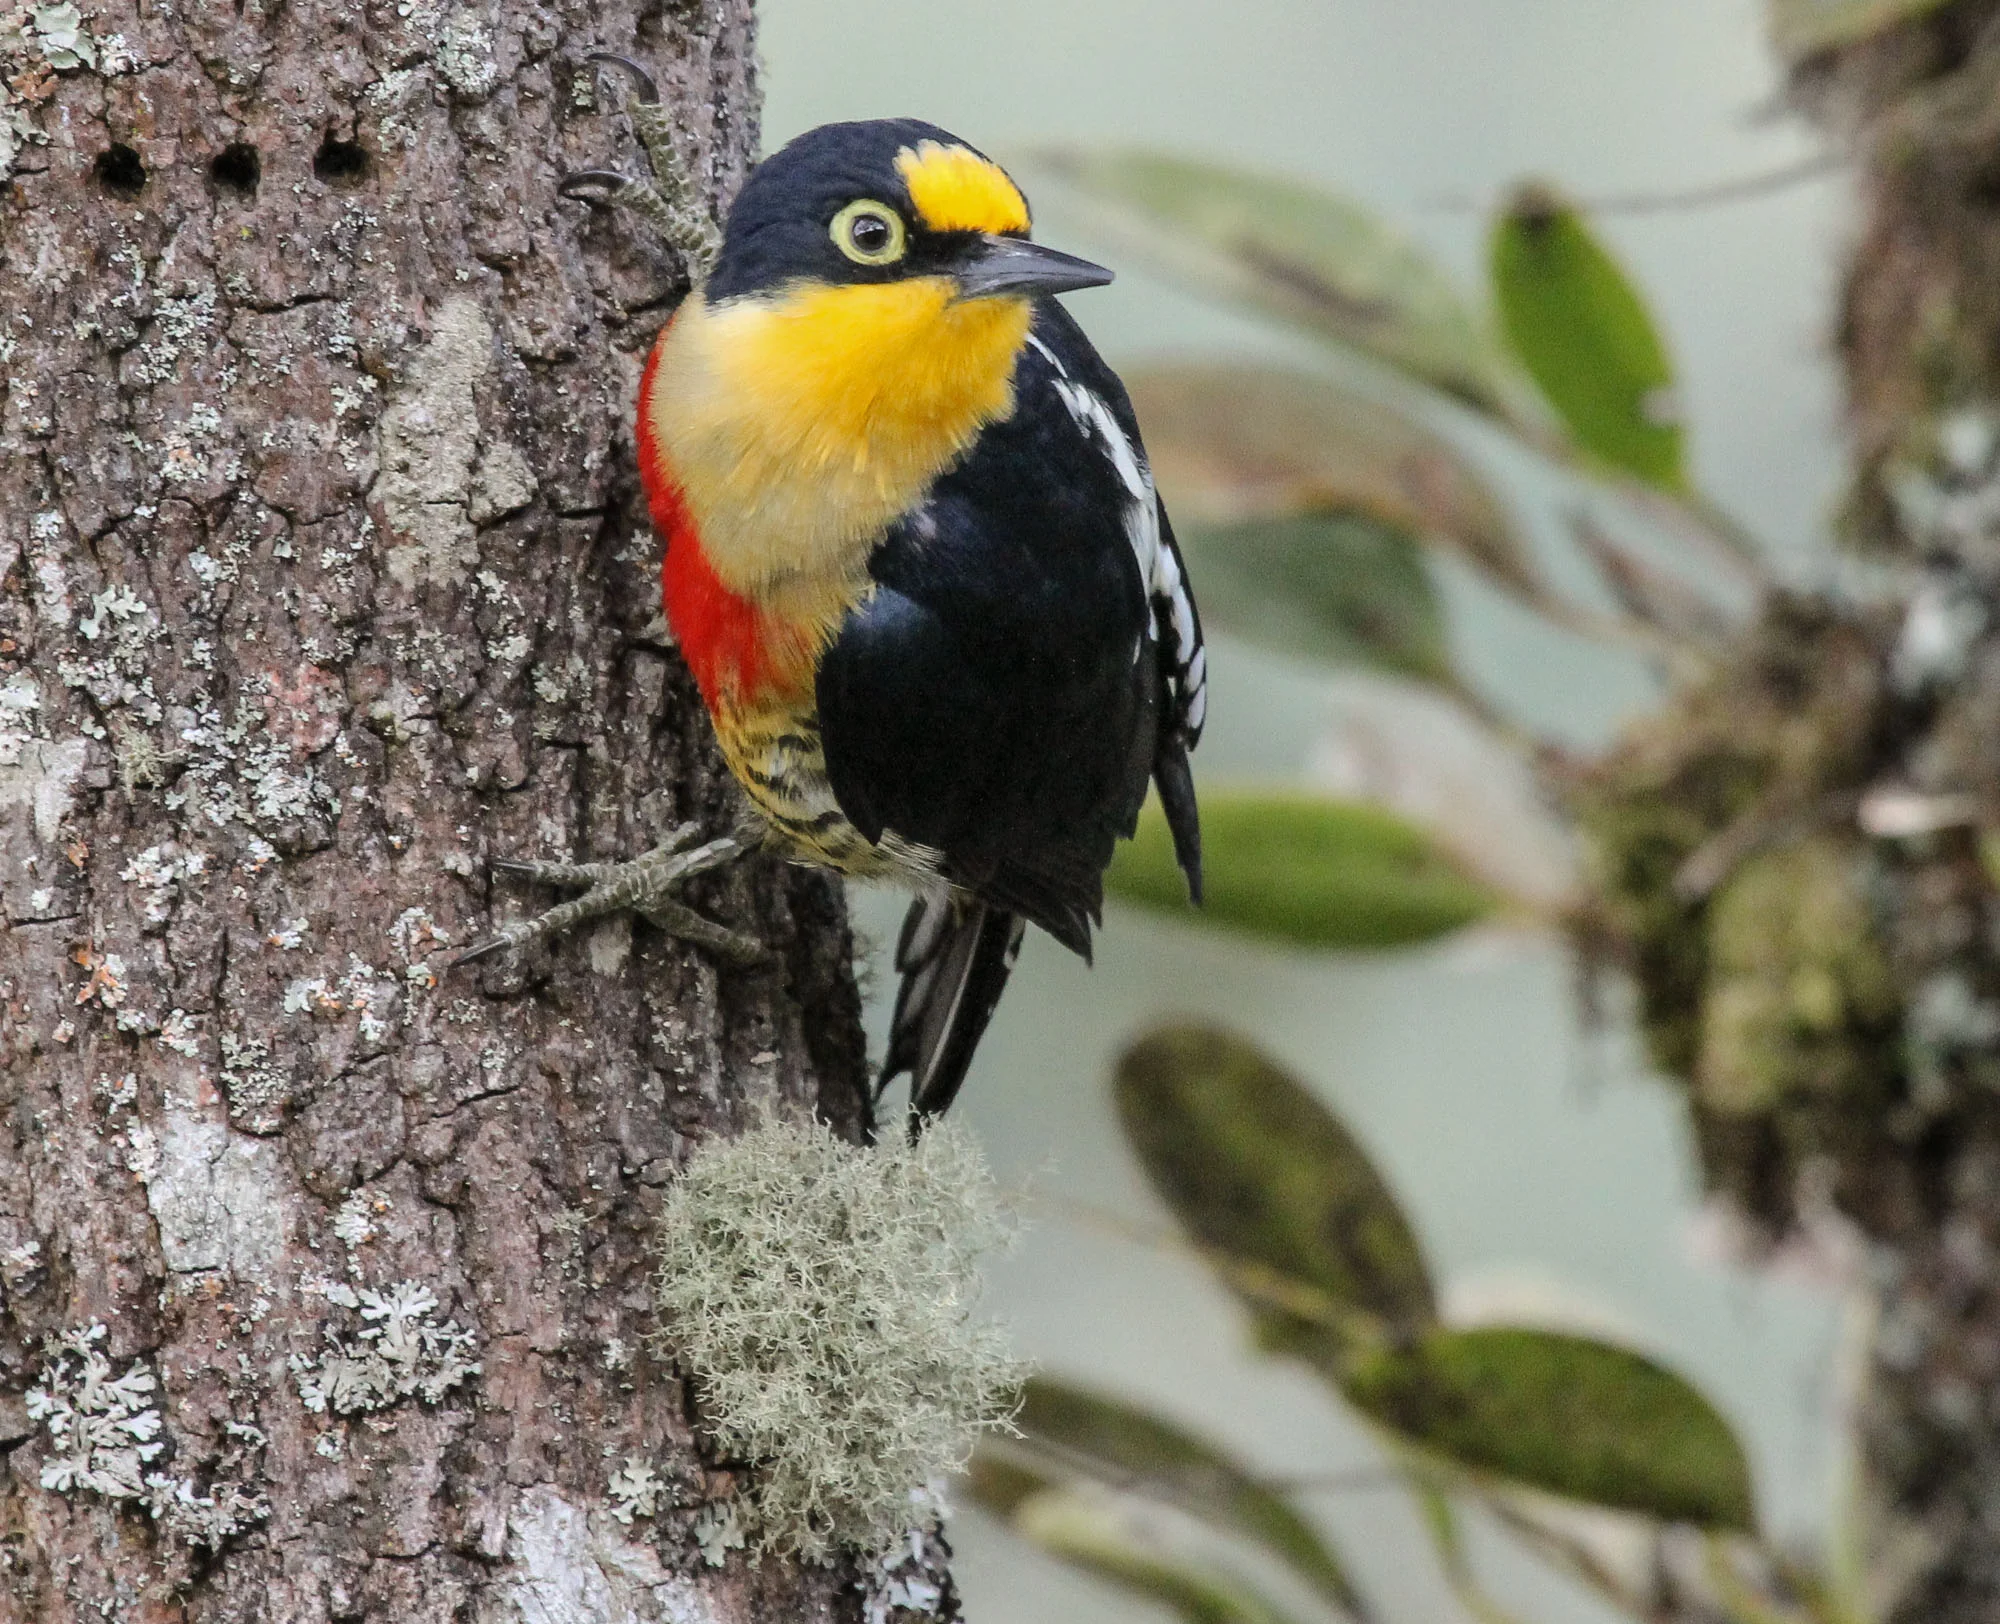 Yellow-fronted Woodpecker (Melanerpes flavifrons)